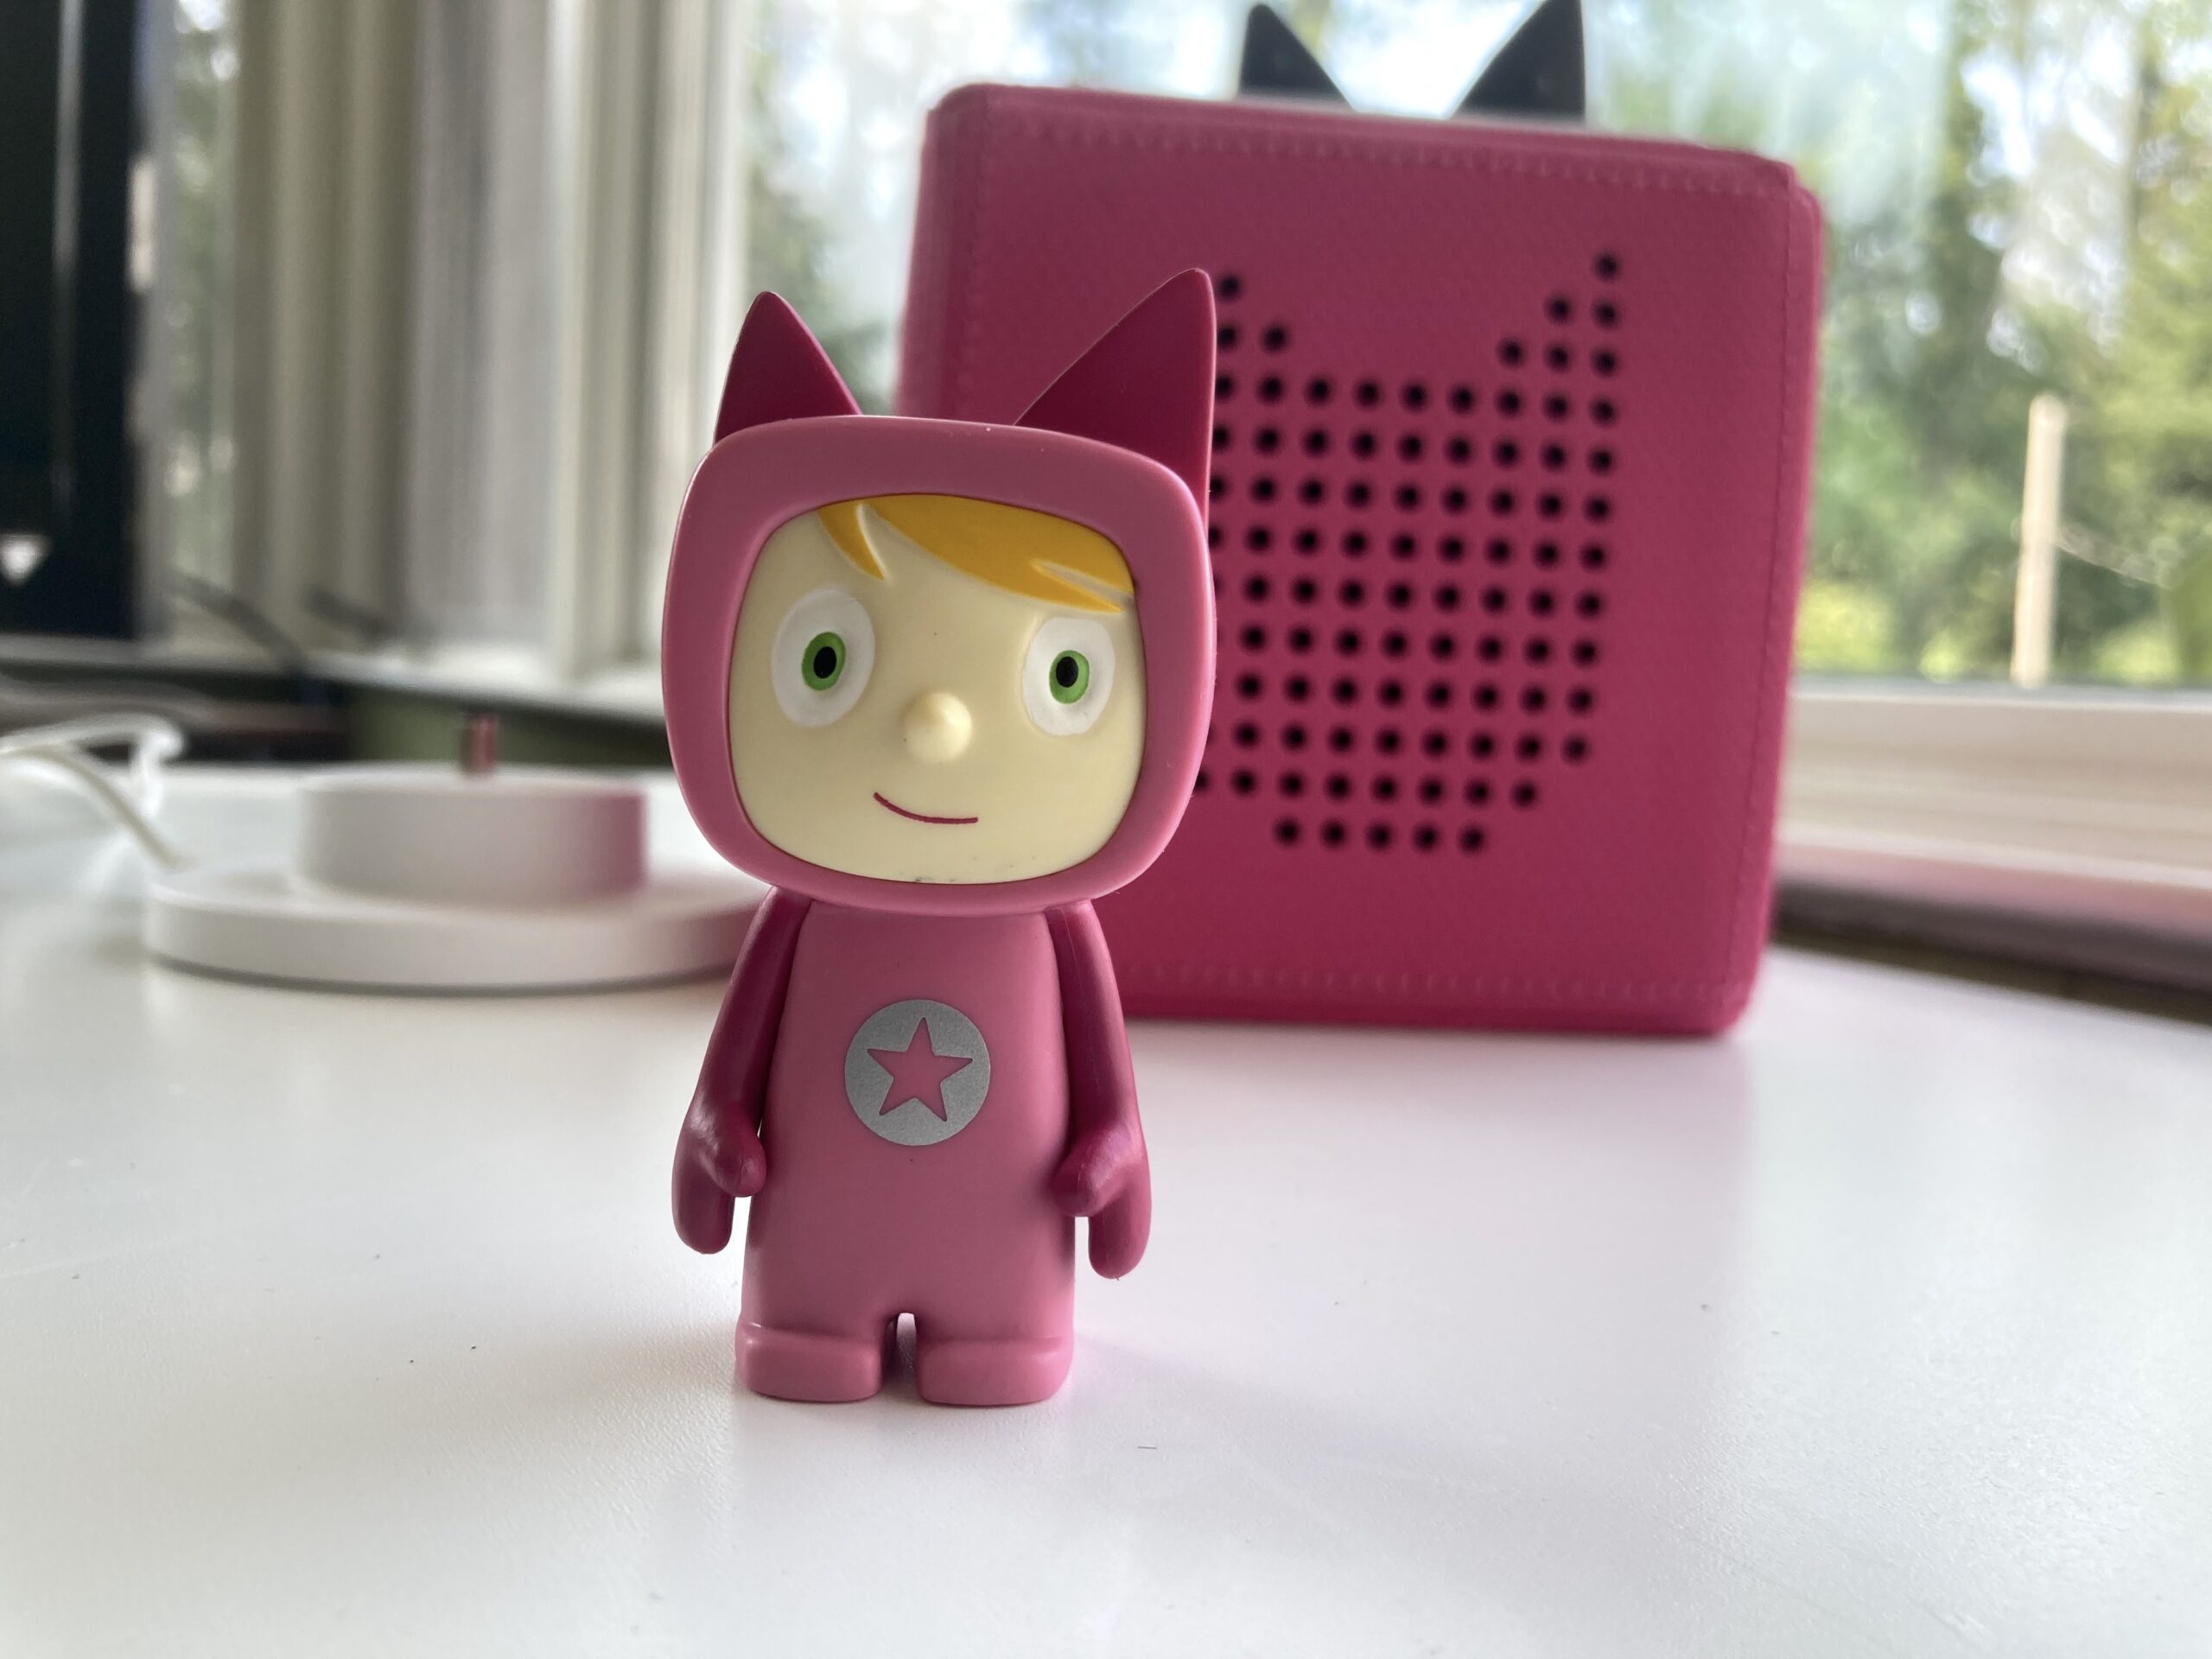 Toniebox review: A cuddly speaker with one big flaw